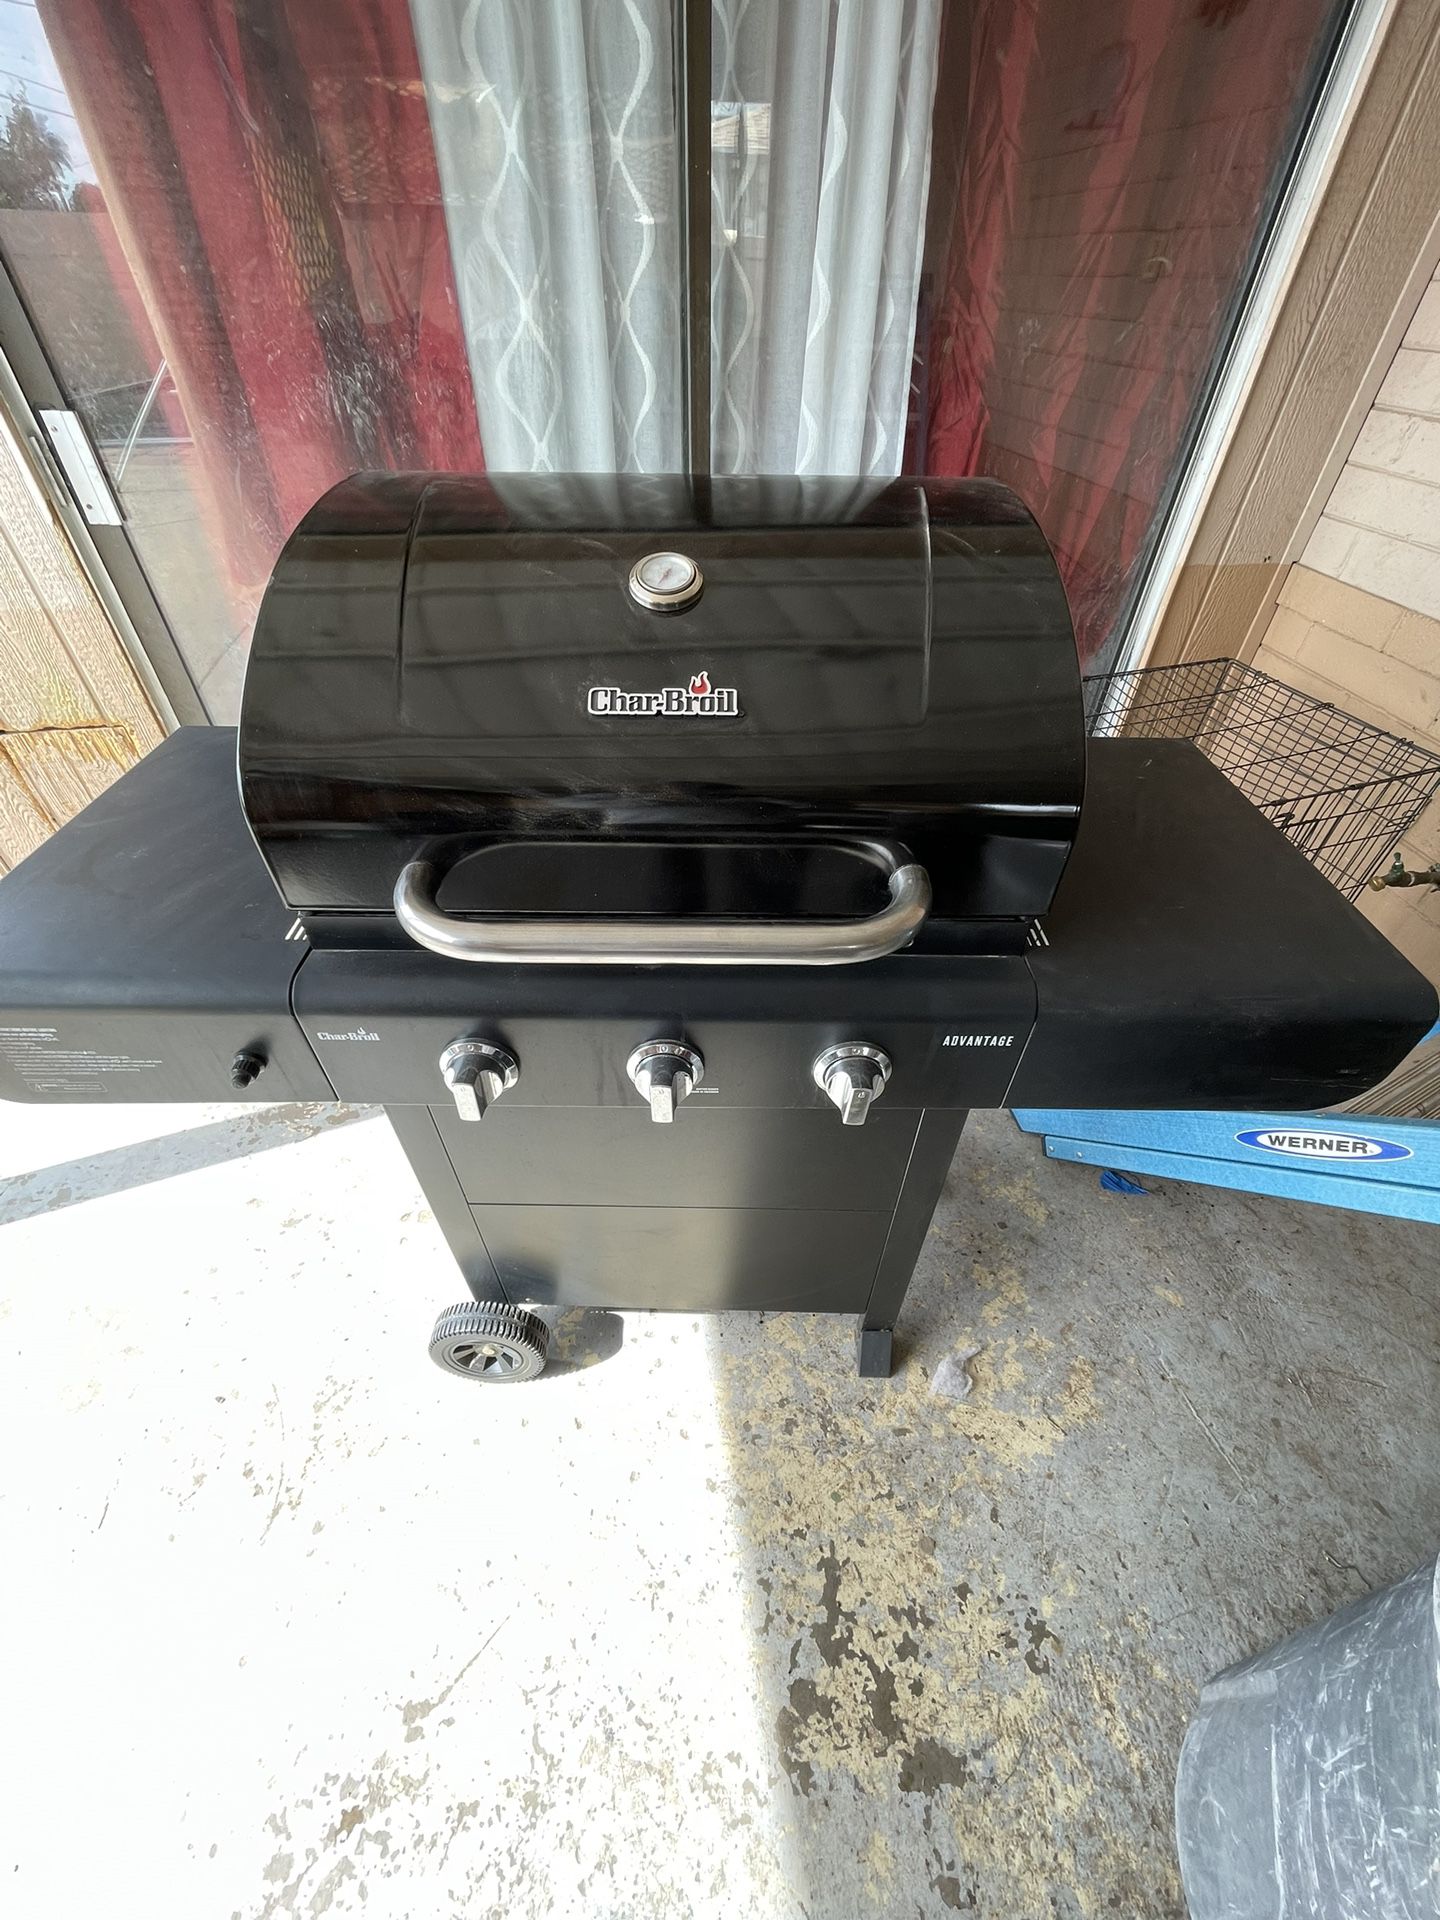 Propane Bbq Grill Good Condition Clean 3 Burners Igniter Working Great. 